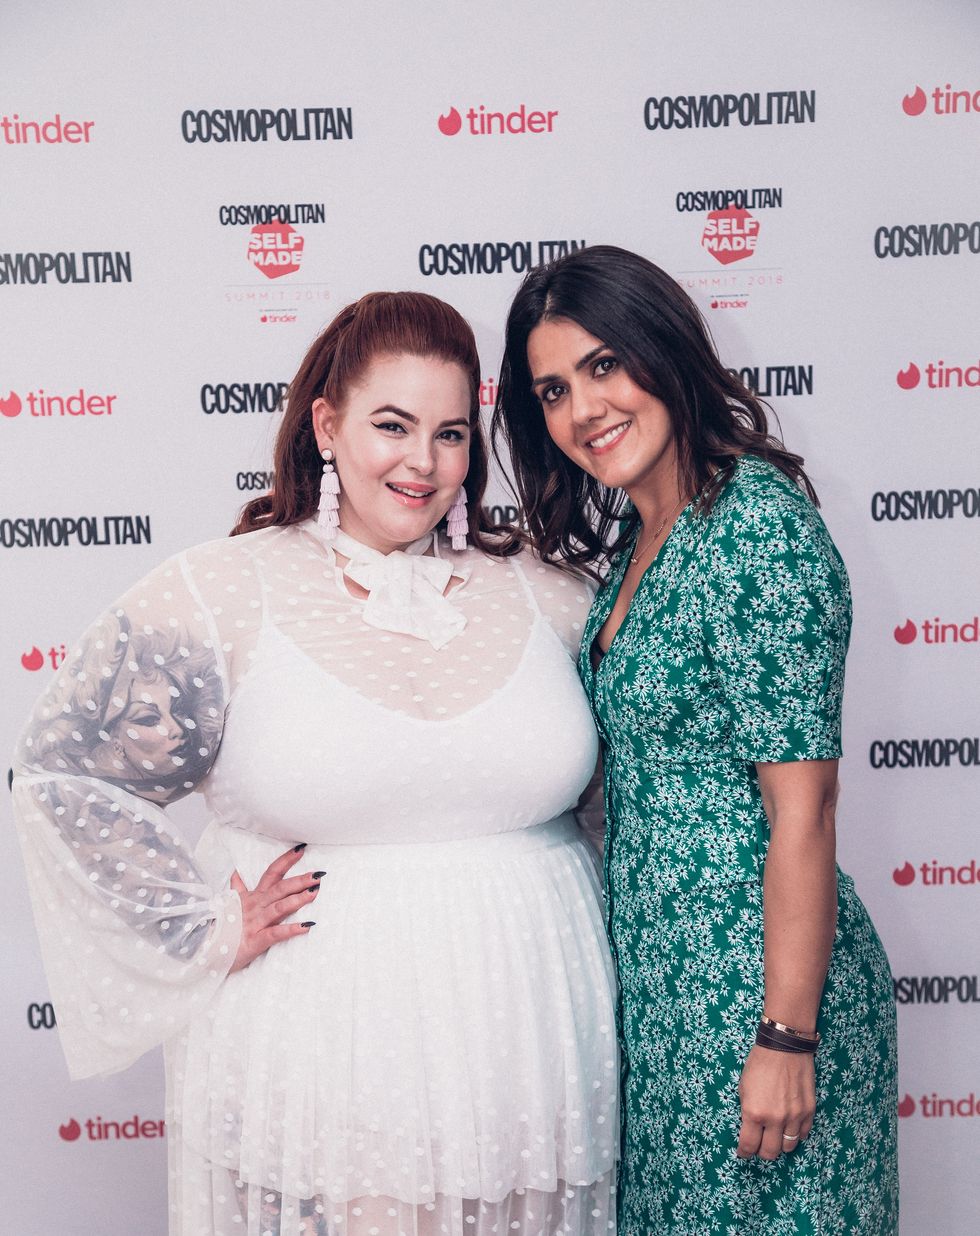 Cosmopolitan's Self Made Summit 2018 in pictures